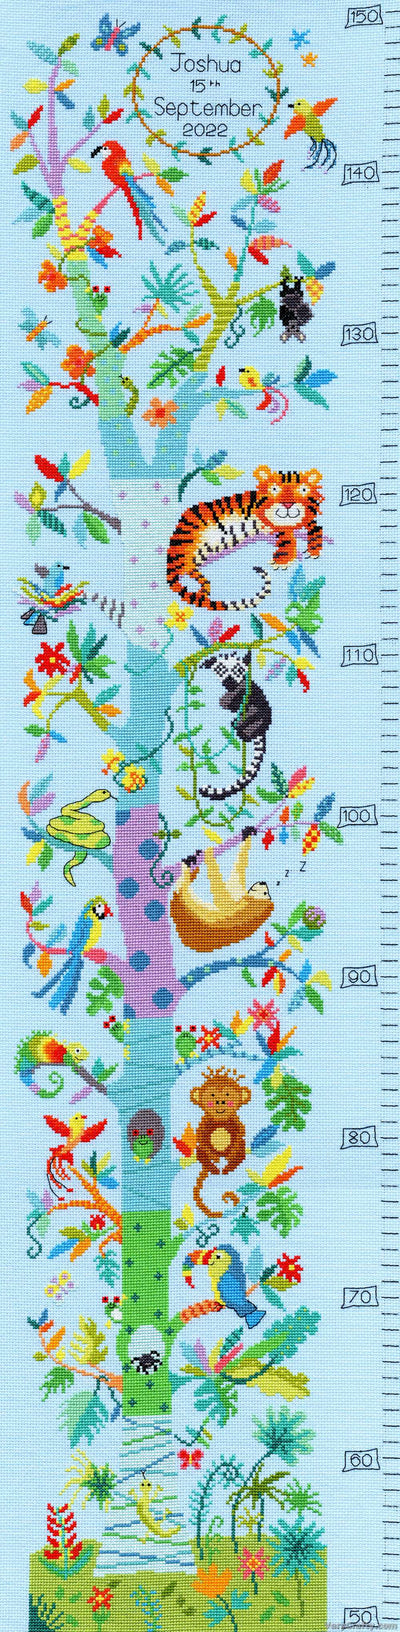 Tropical Height Chart Cross Stitch Kit - Bothy Threads